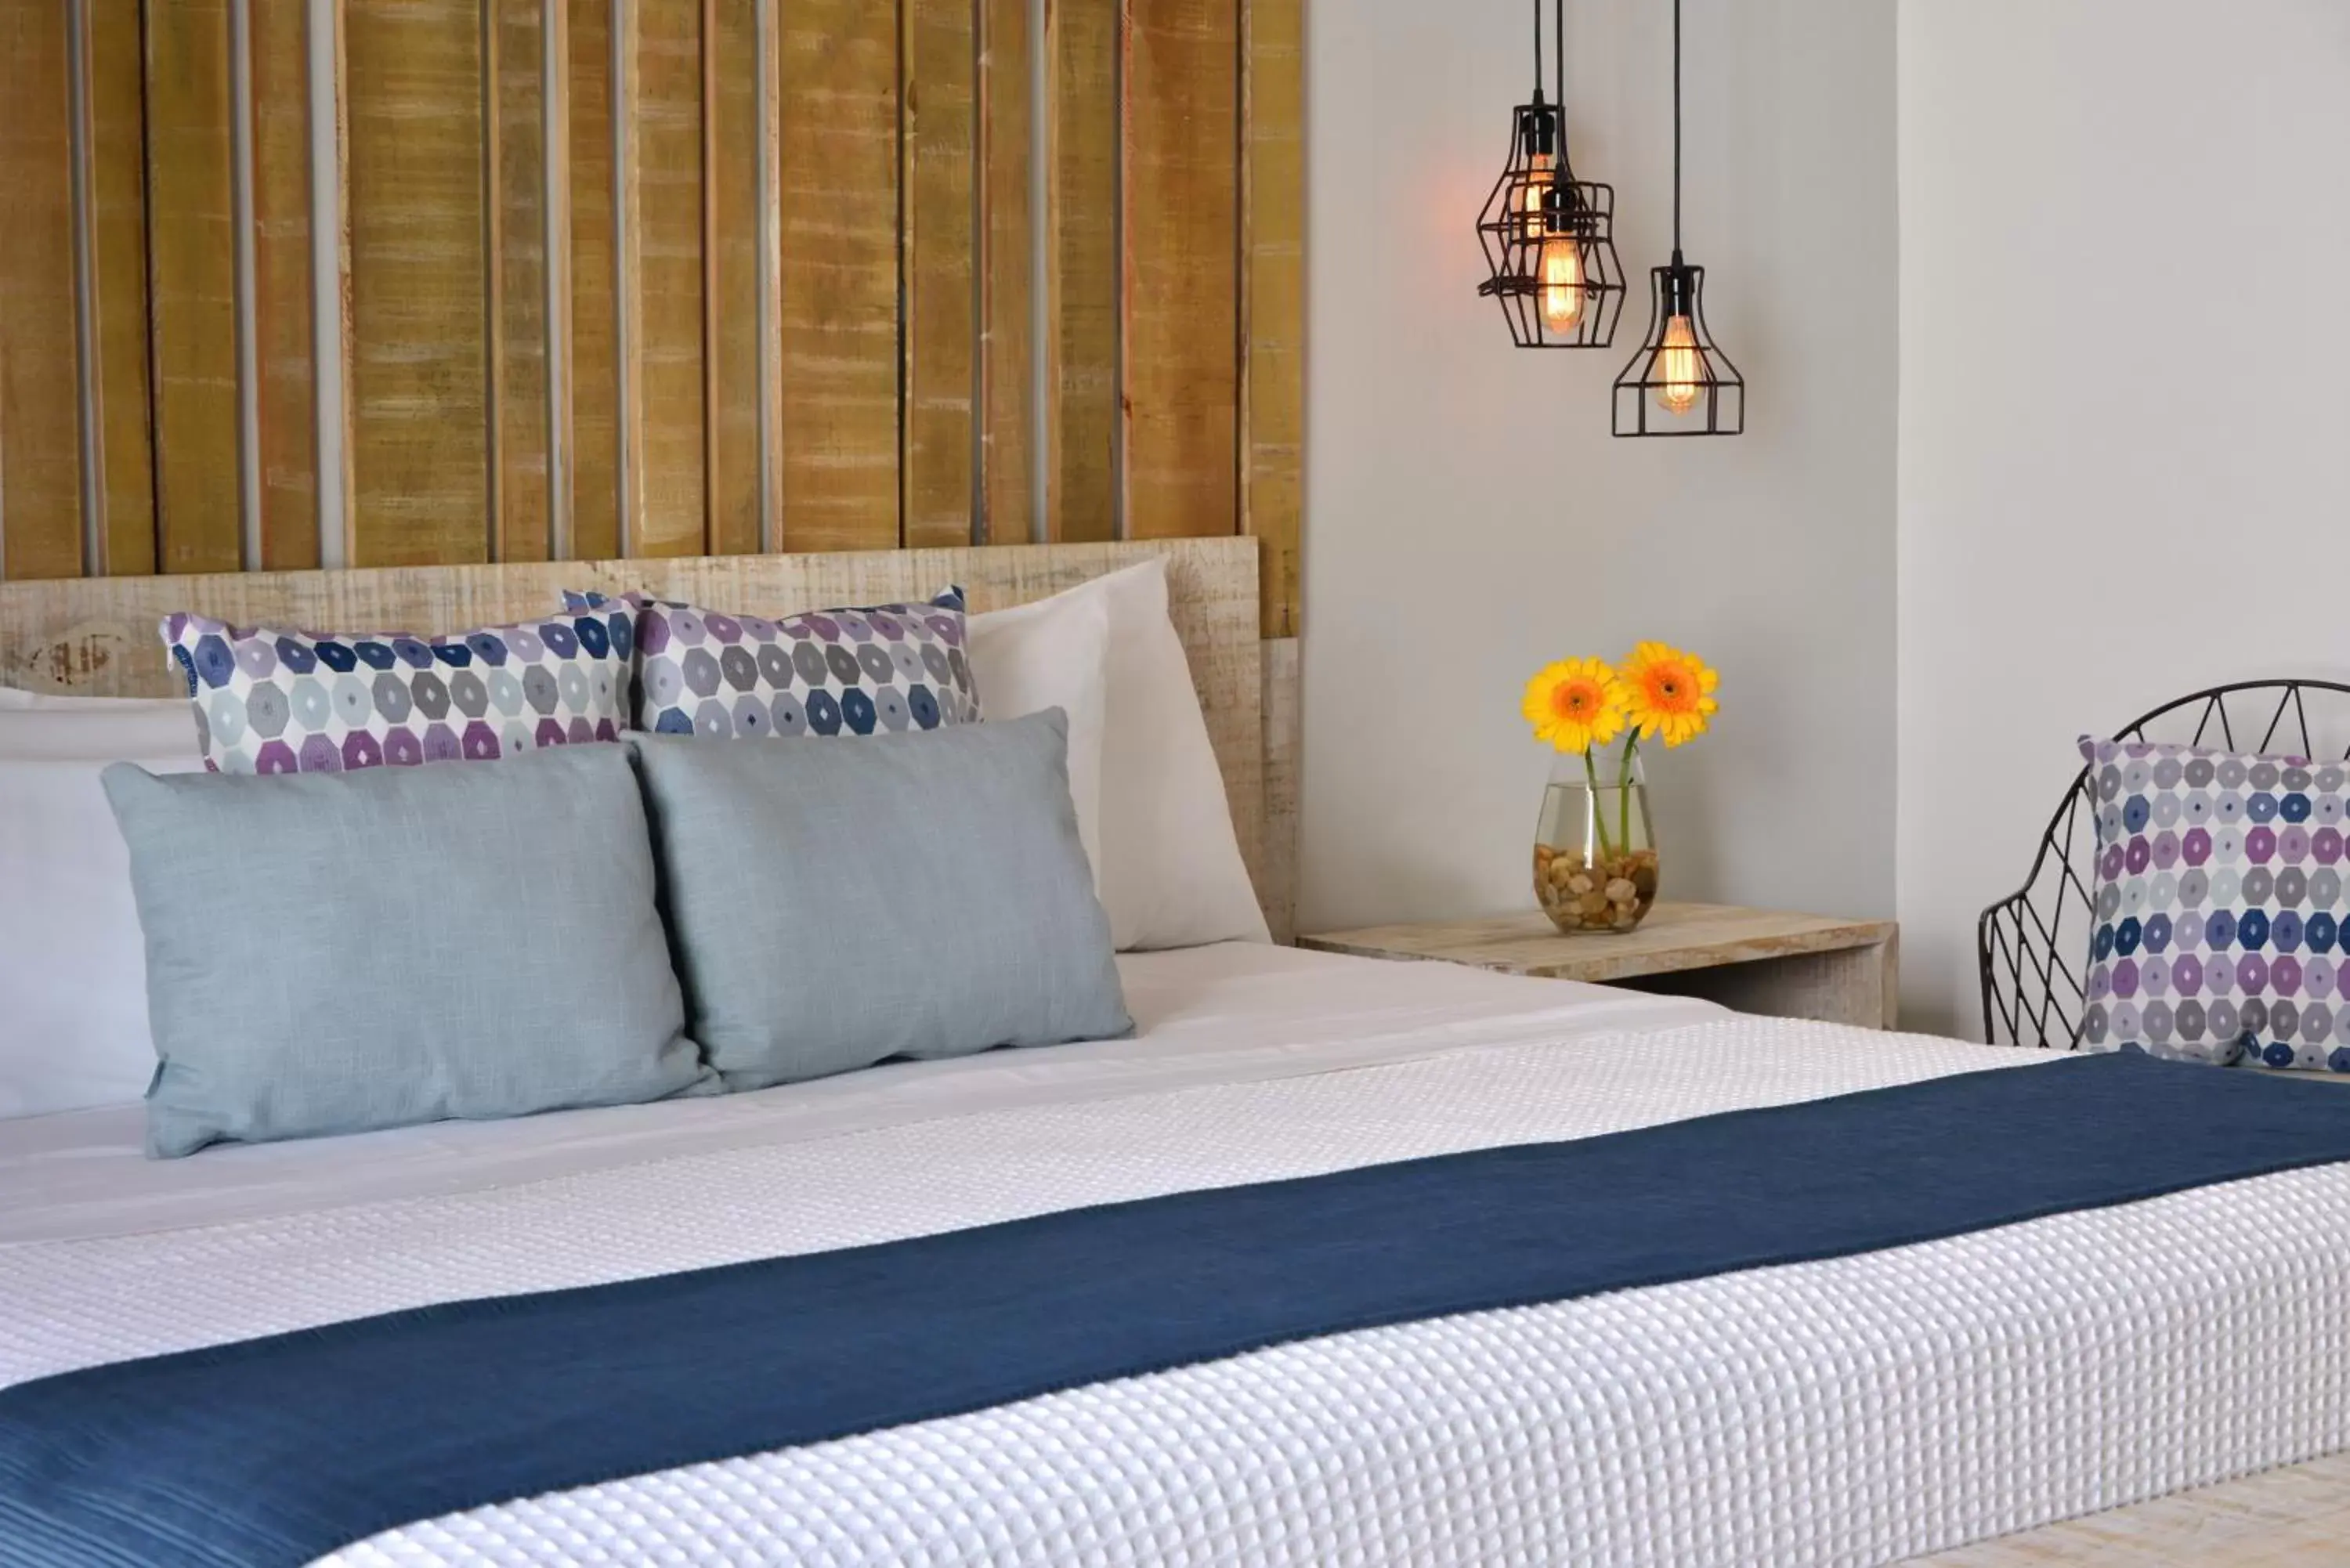 Bed in Elements Tulum Boutique Hotel